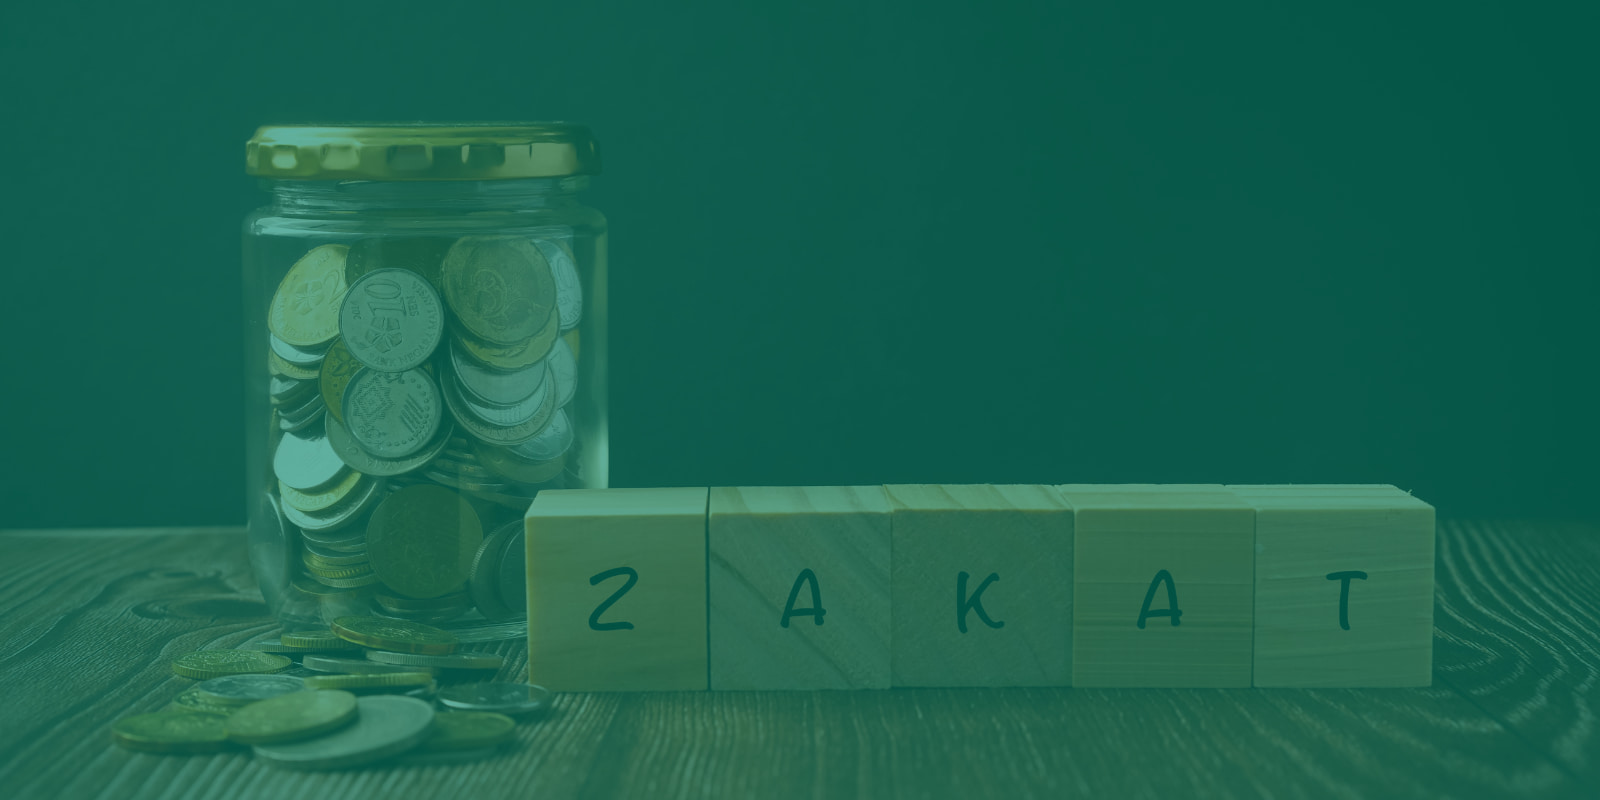 Understanding Tax And Zakat-A Comparison For Companies In Saudi Arabia